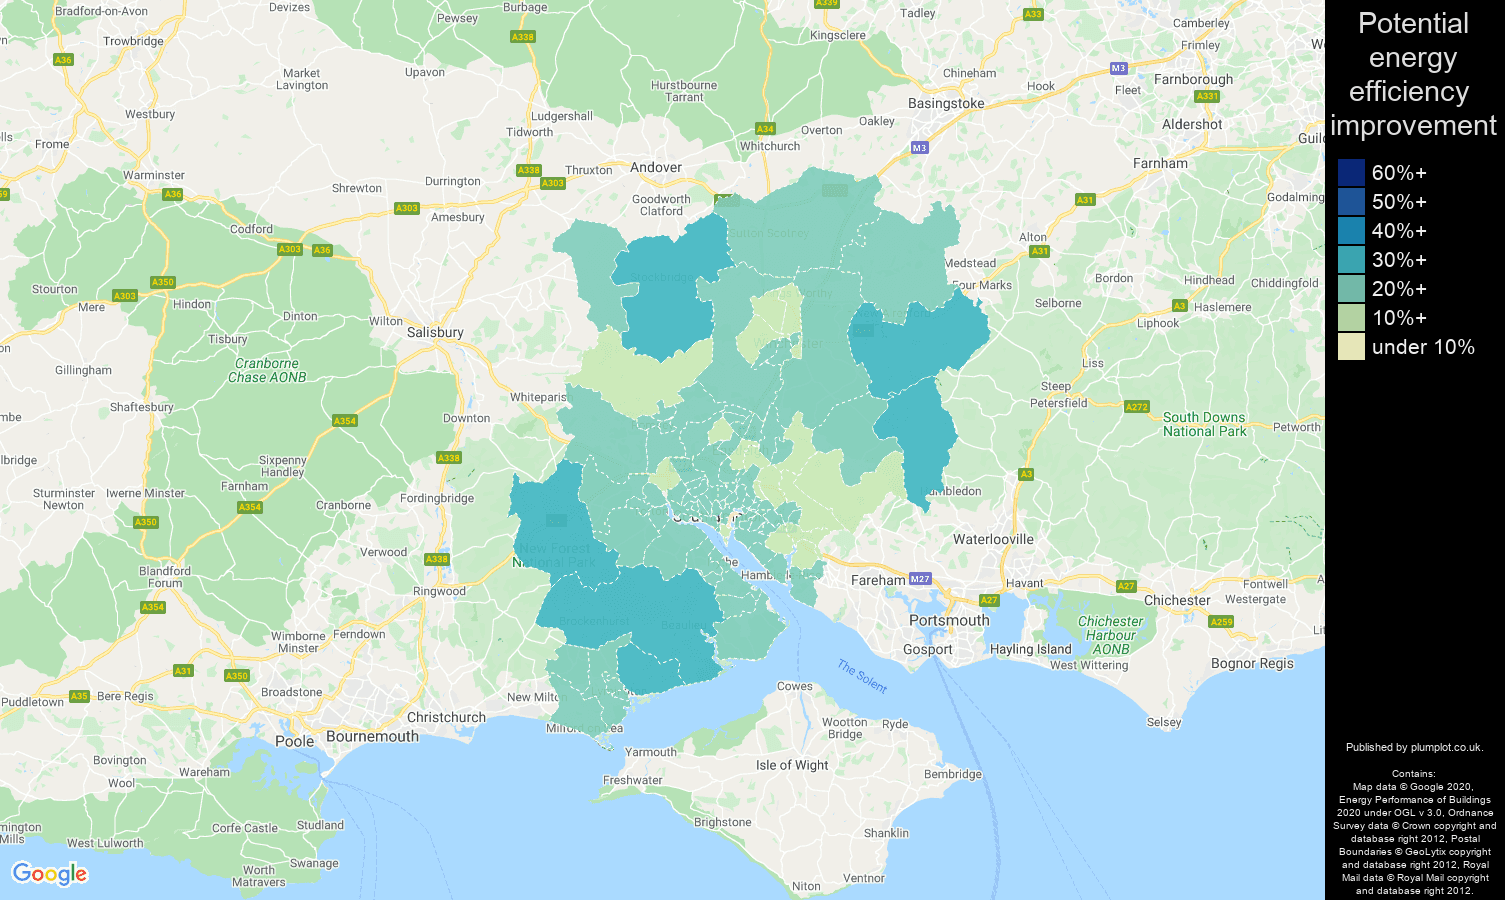 Southampton map of potential energy efficiency improvement of houses